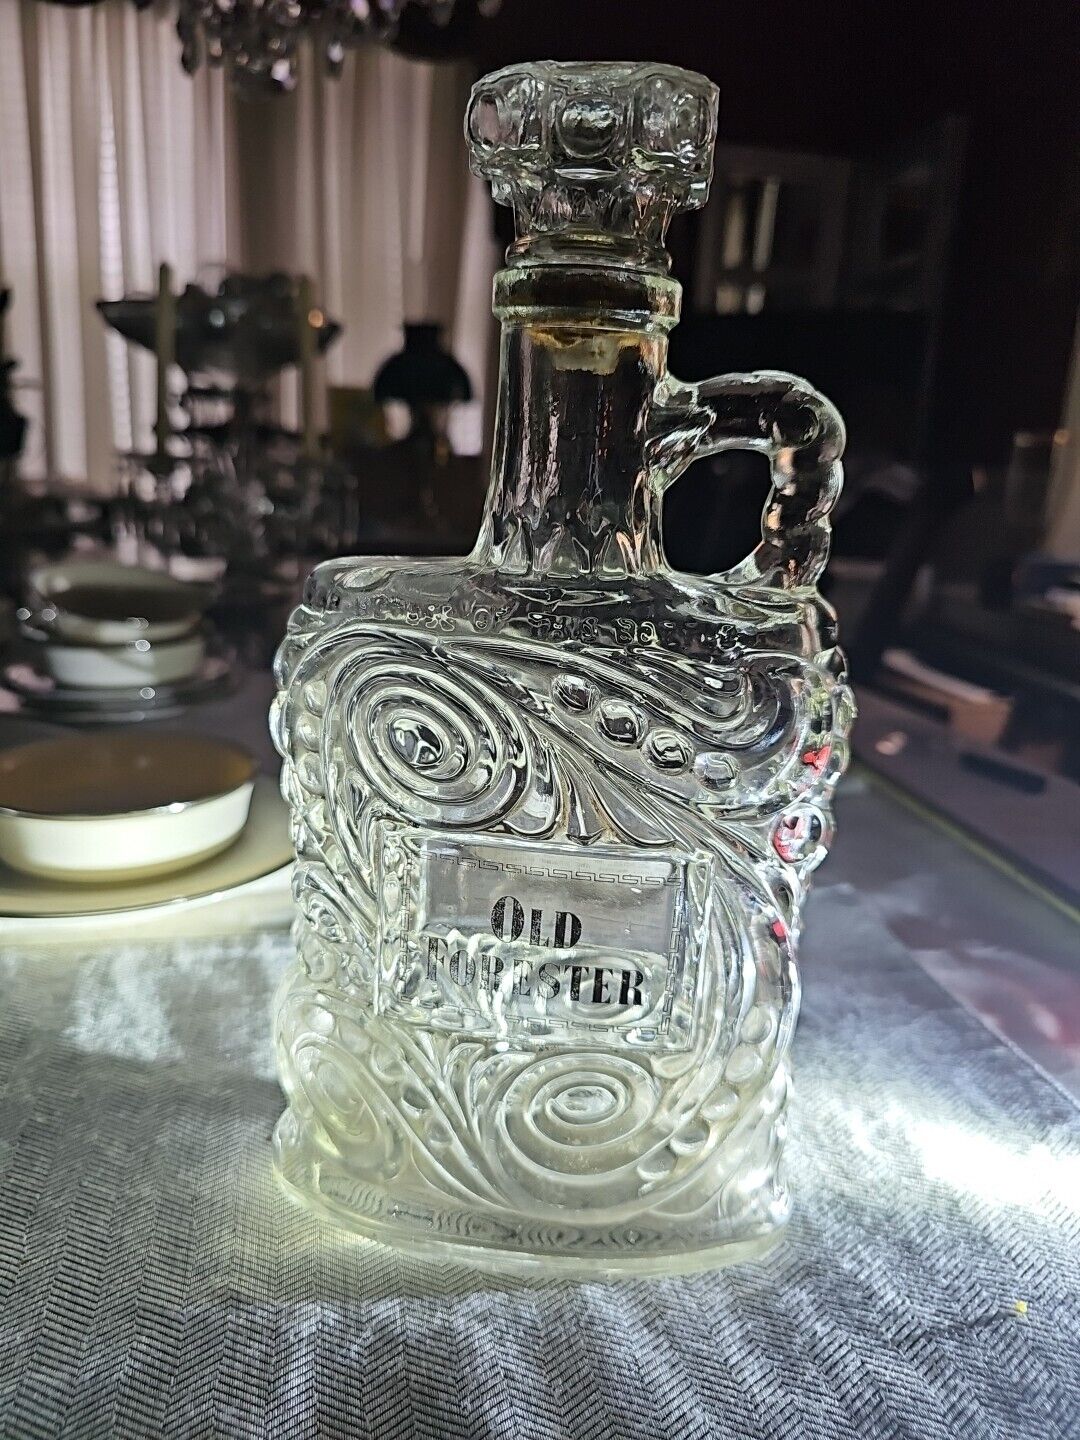 VINTAGE OLD FORESTER EMPTY GLASS DECANTER BOTTLE W/ STOPPER D-10 66-52 Circa1950